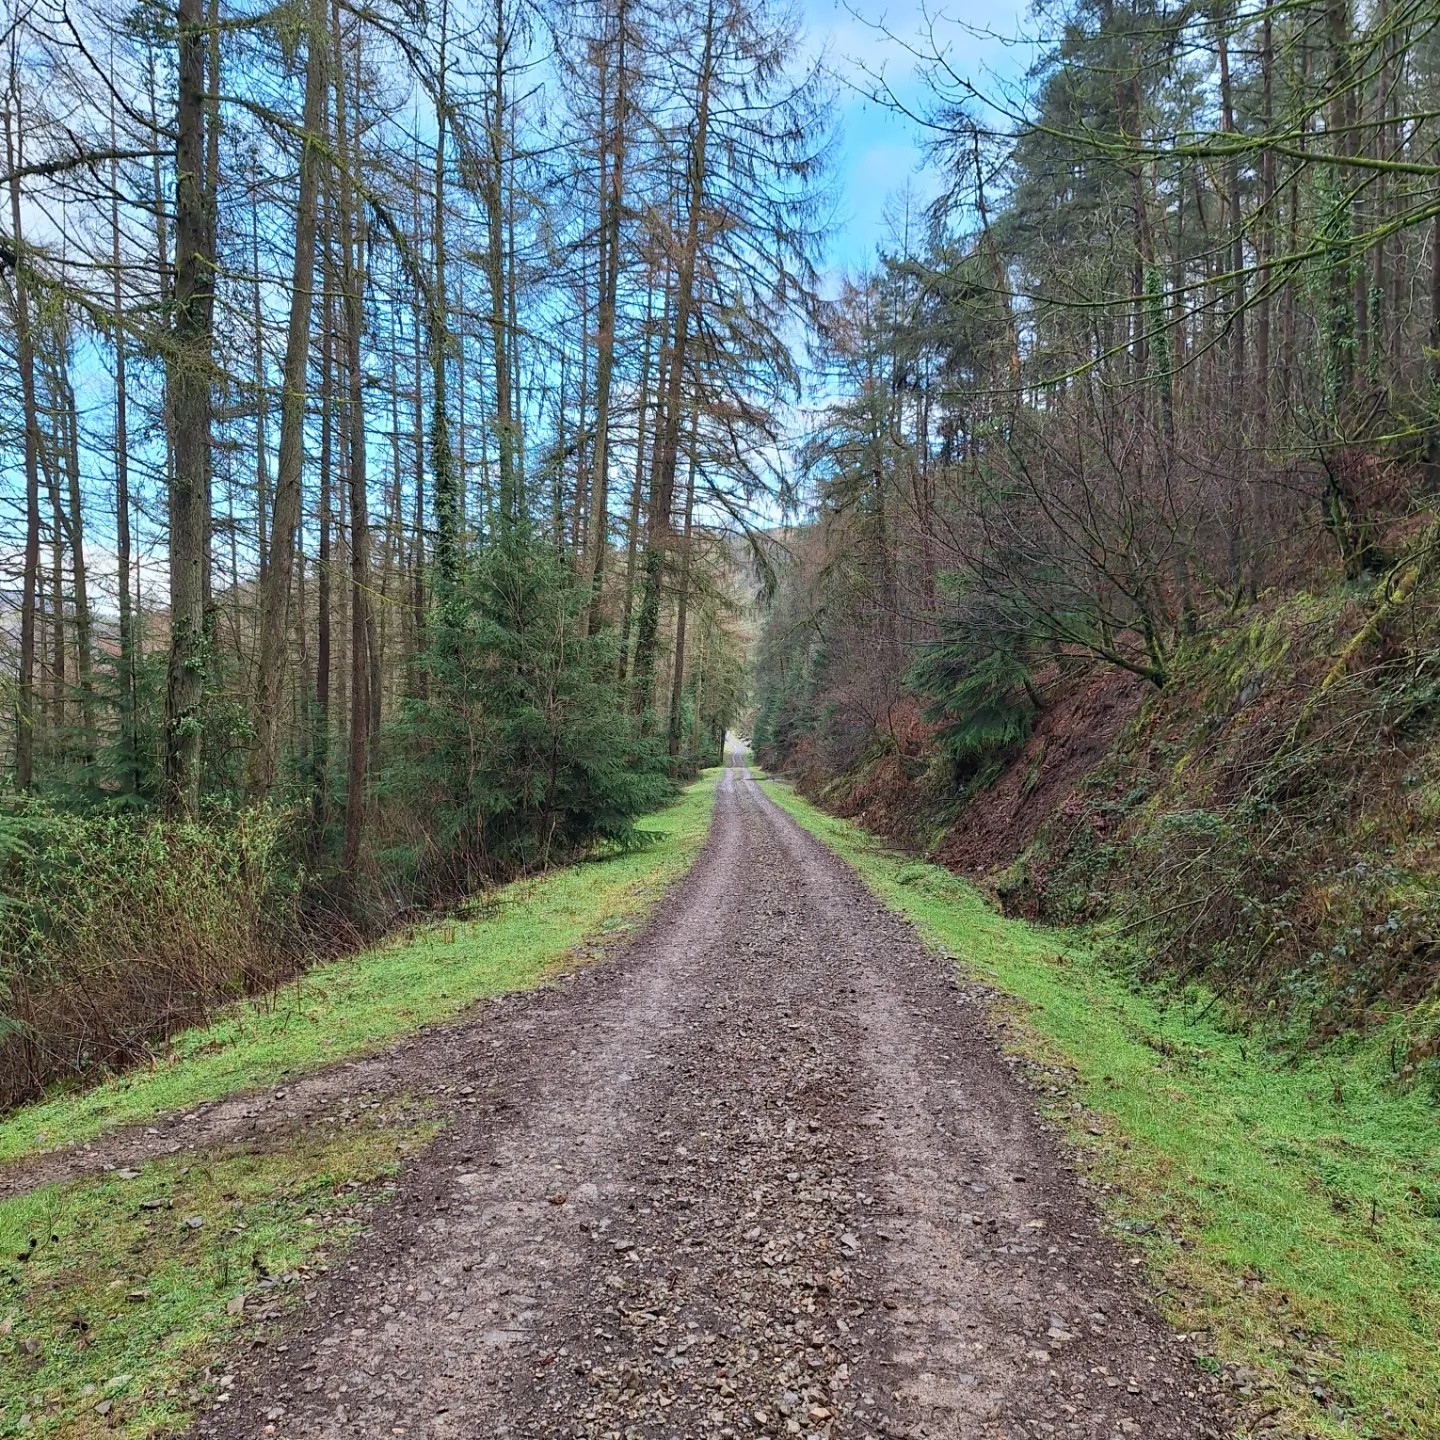 The 'Mile Climb', Sirhowy Valley Country Park - a section of the forestry road proposed for the haul route